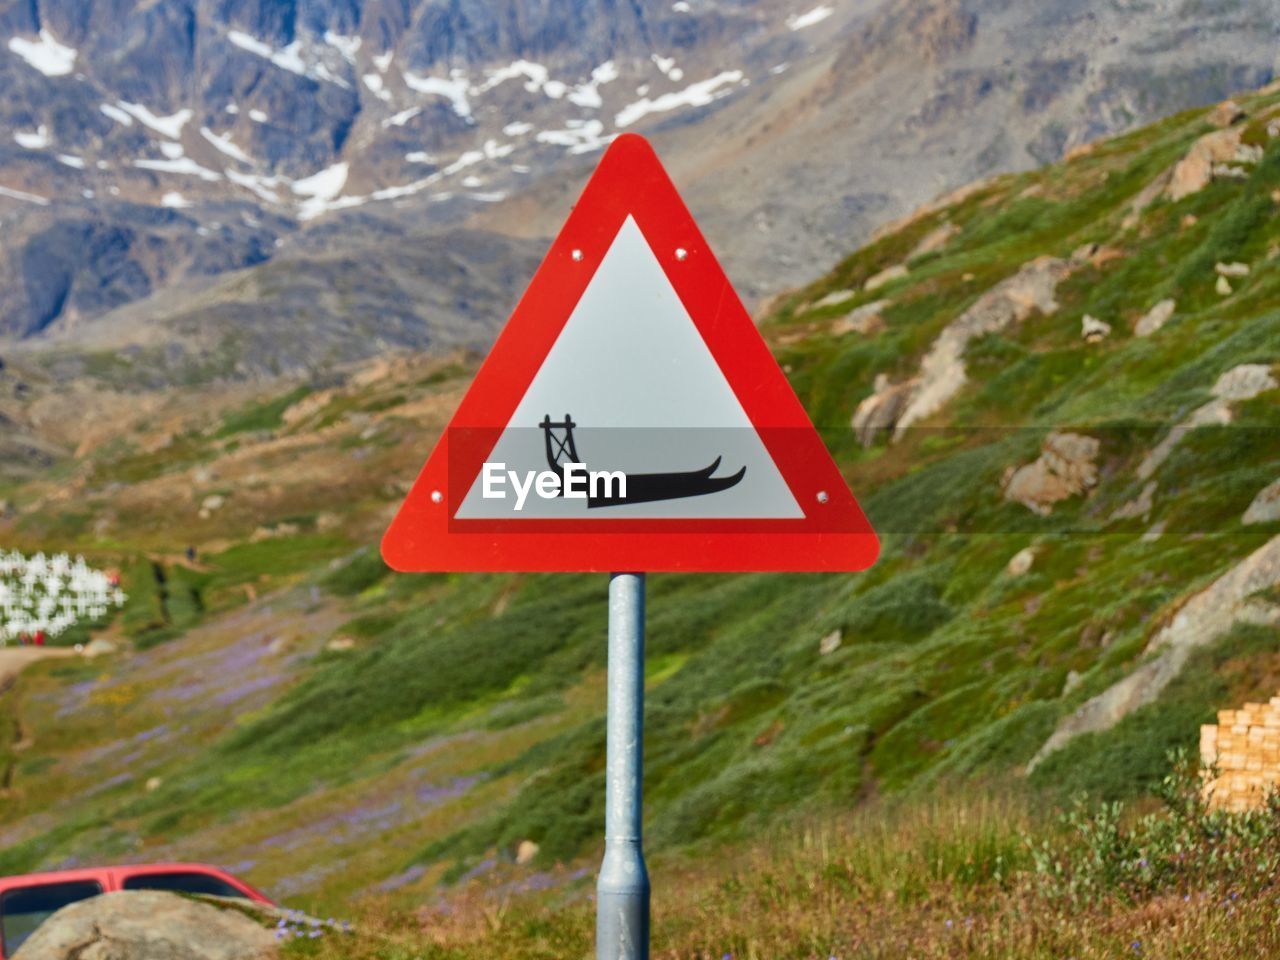 CLOSE-UP OF ROAD SIGN ON LANDSCAPE AGAINST MOUNTAIN